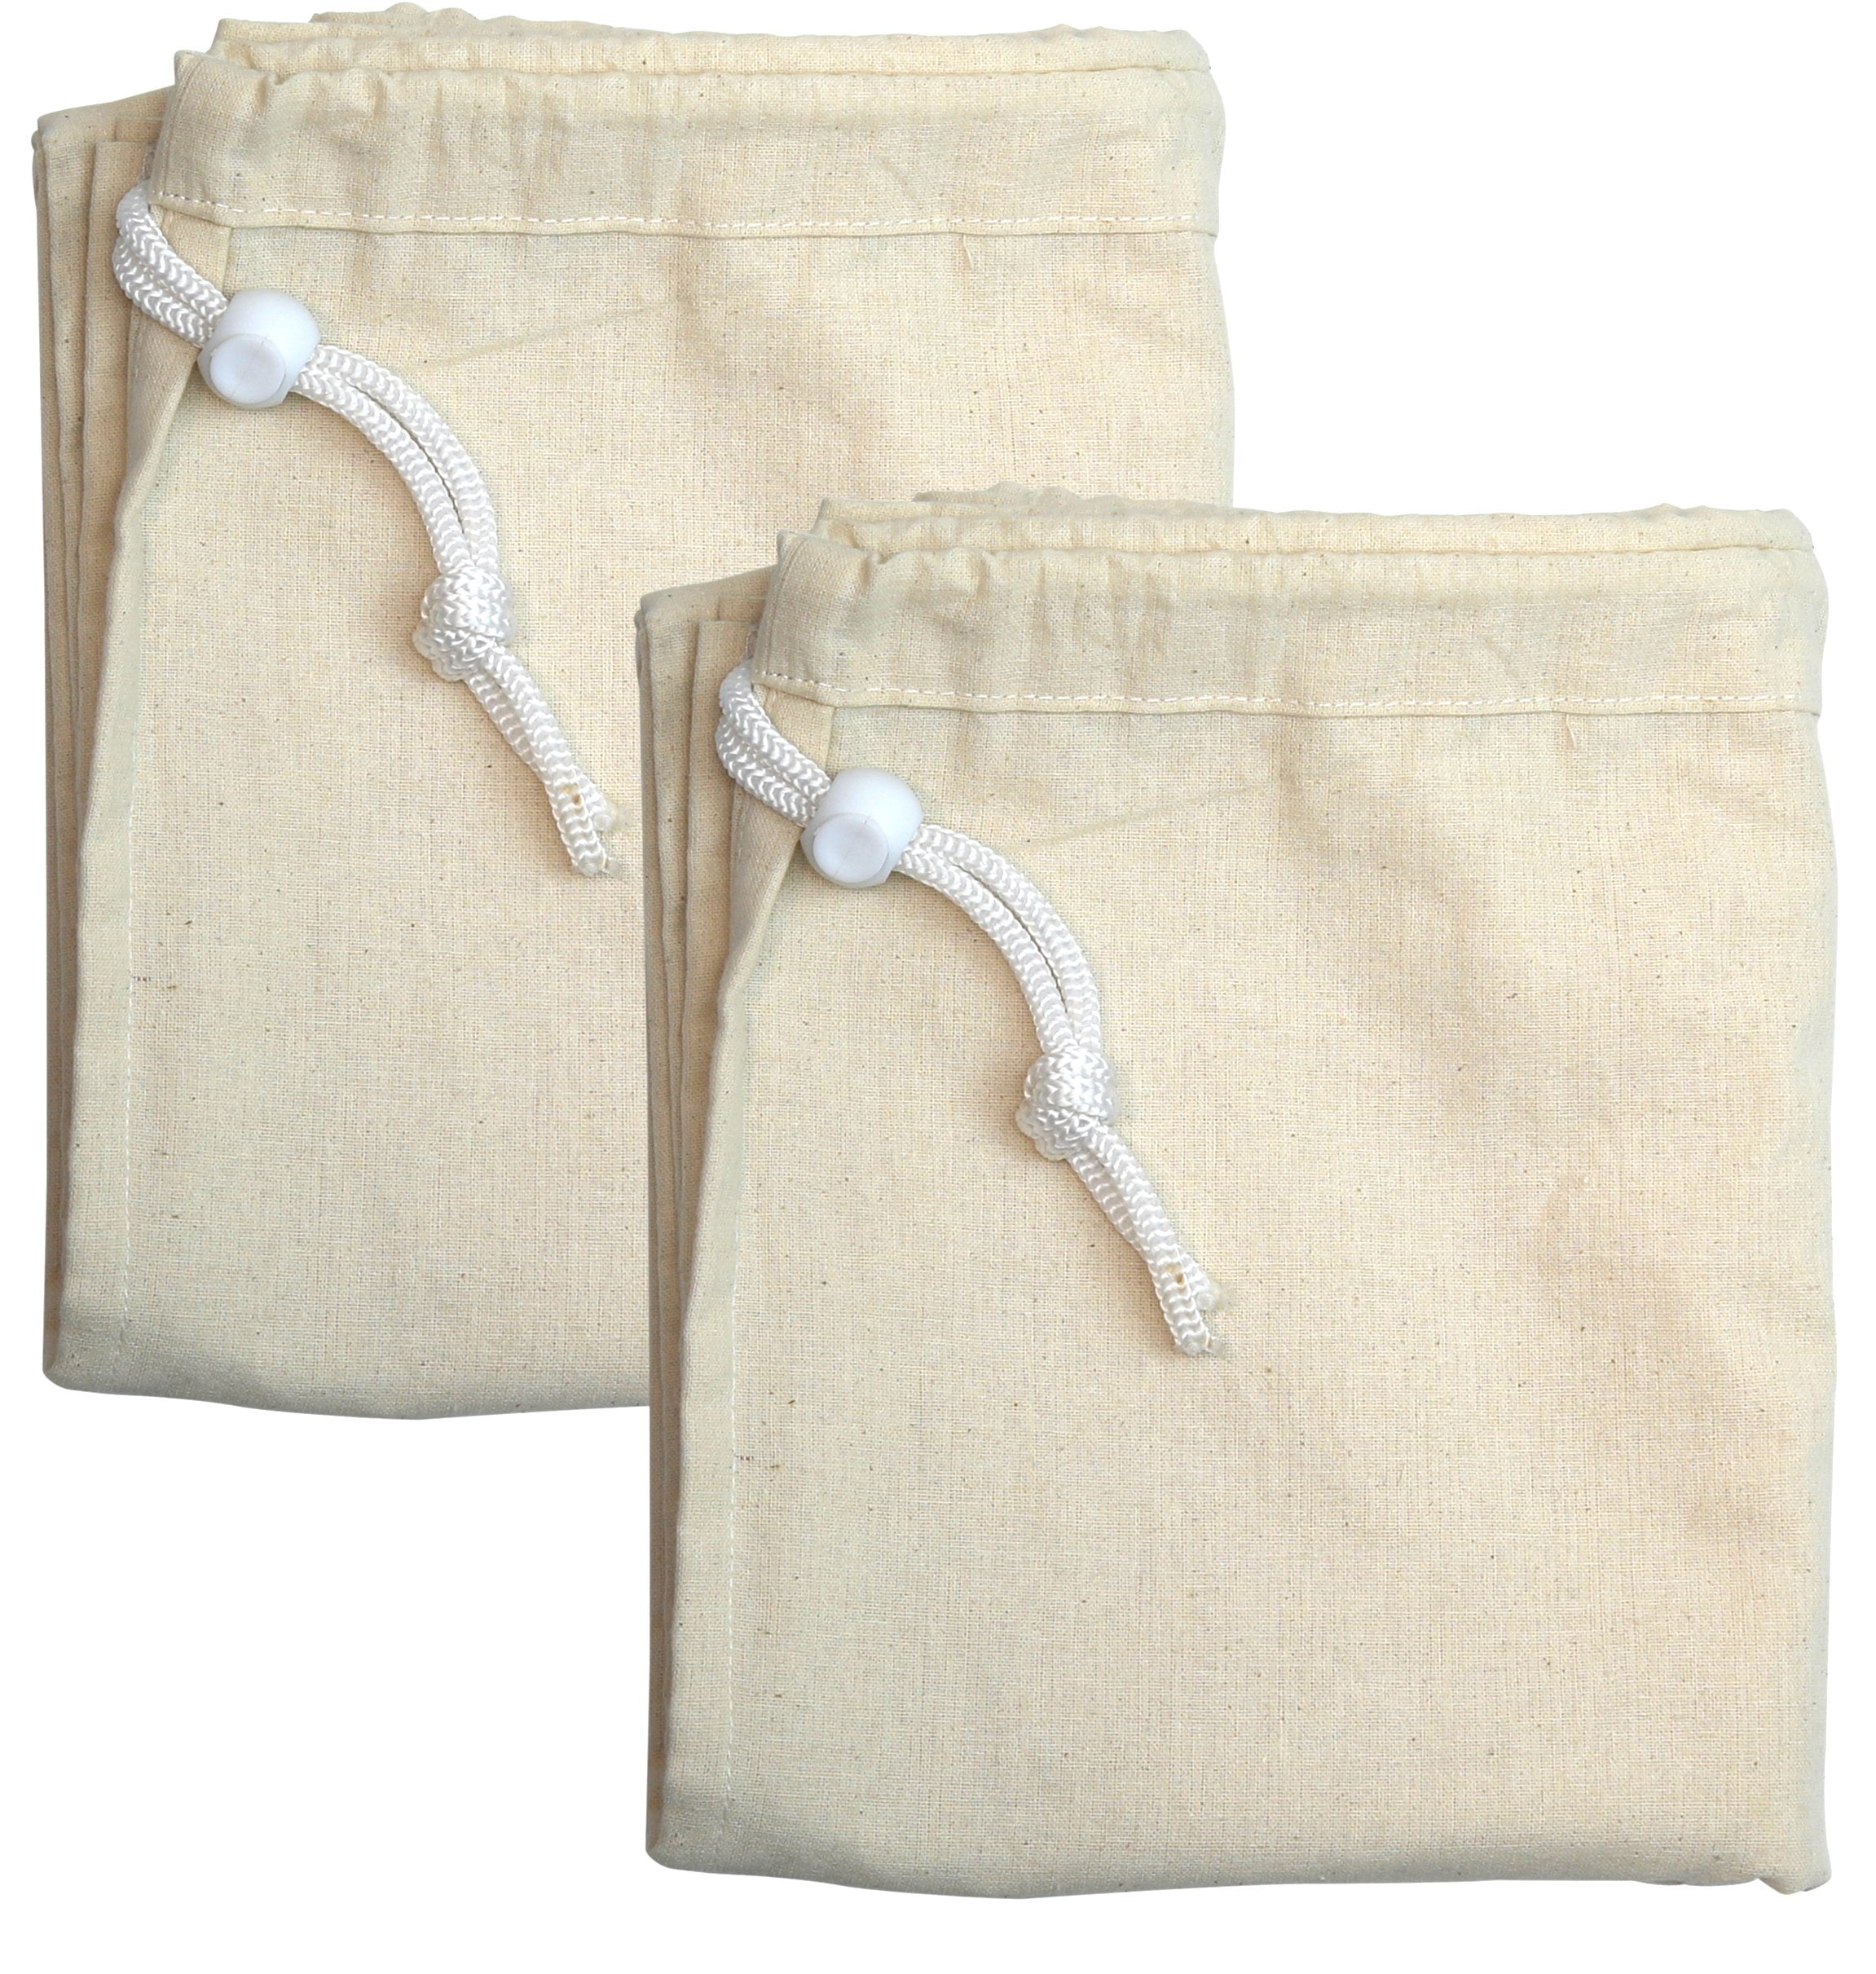 28 x 36 Cotton Laundry Bag with Drawstring